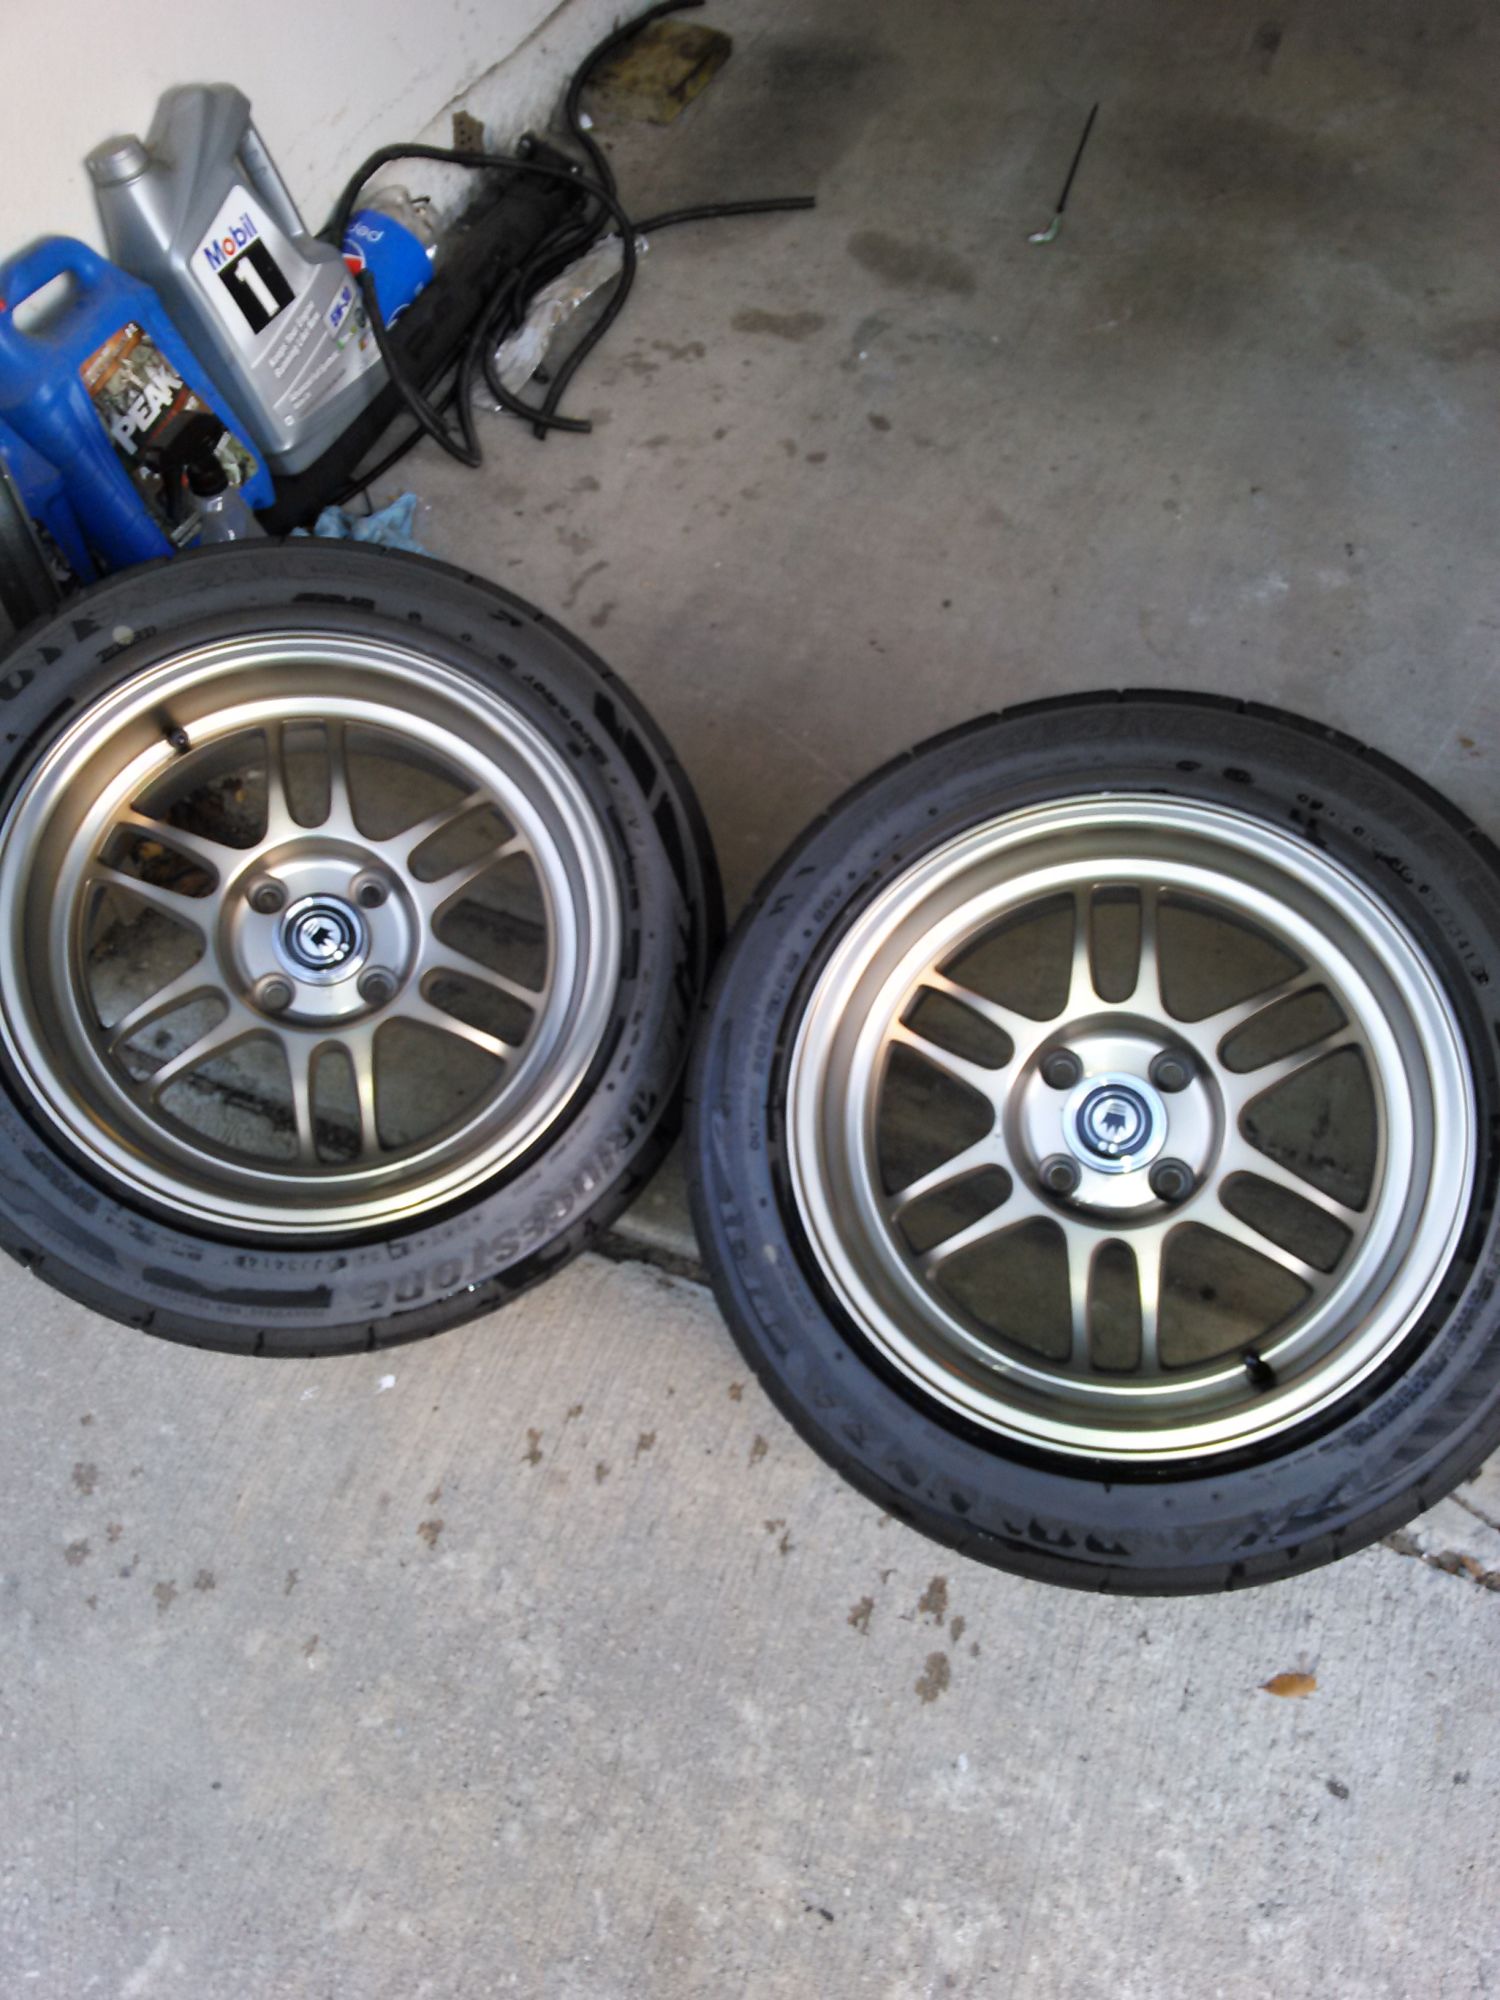 Going with 16x7 wheels. 205/50 vs 205/45 vs 225/45